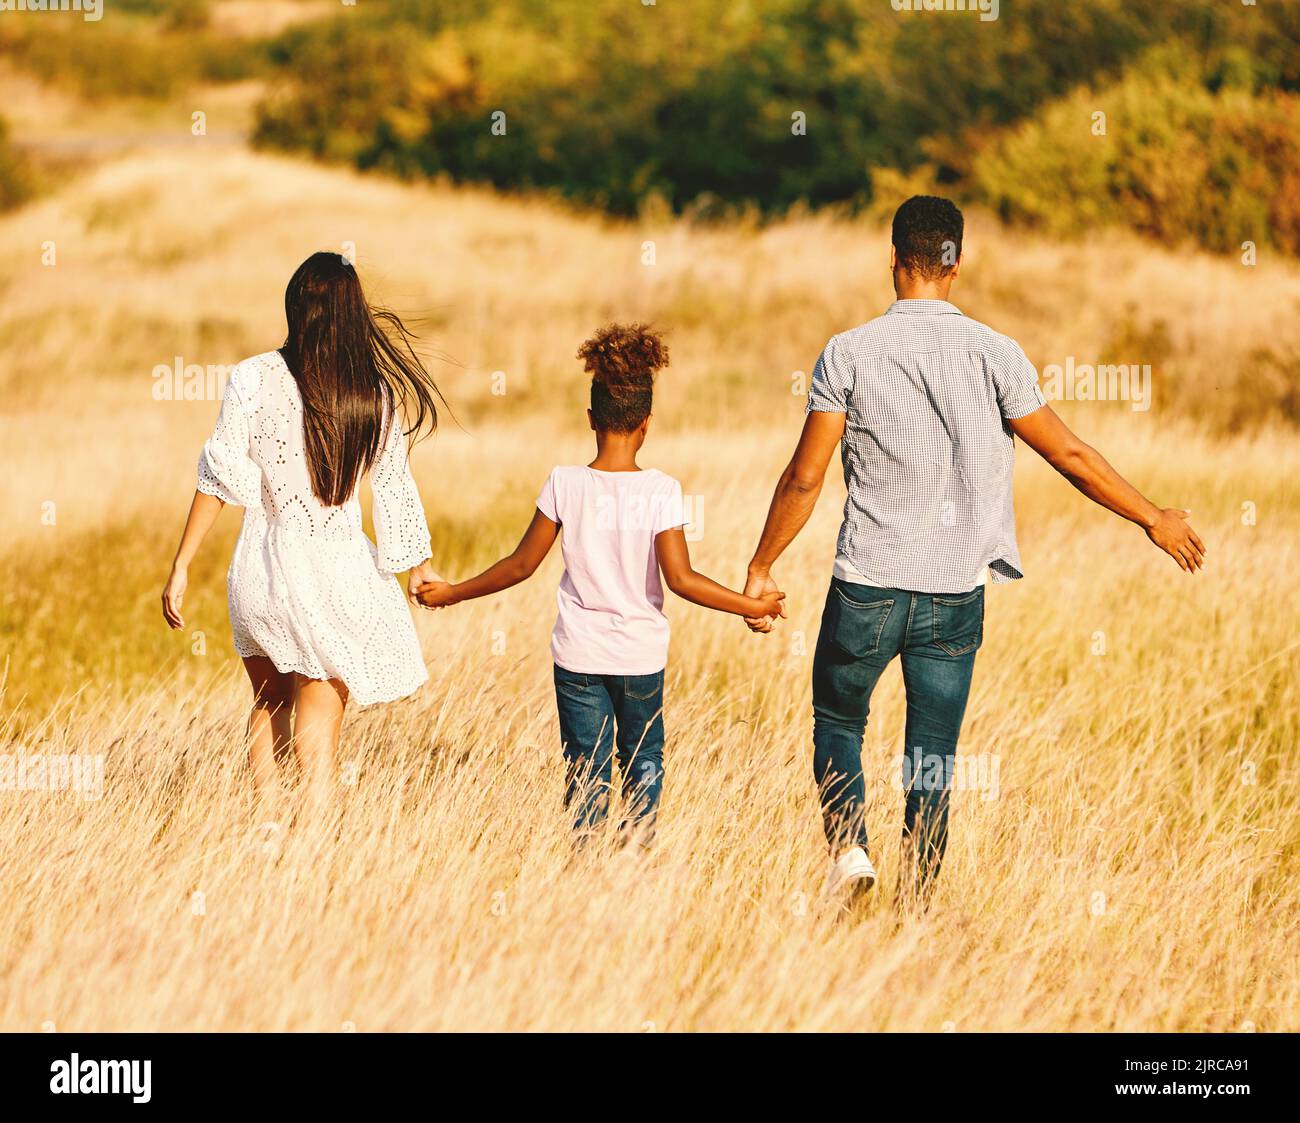 child daughter family happy mother father running active healthy carefree fun together girl walking cheerful field outdoor natur summer Stock Photo